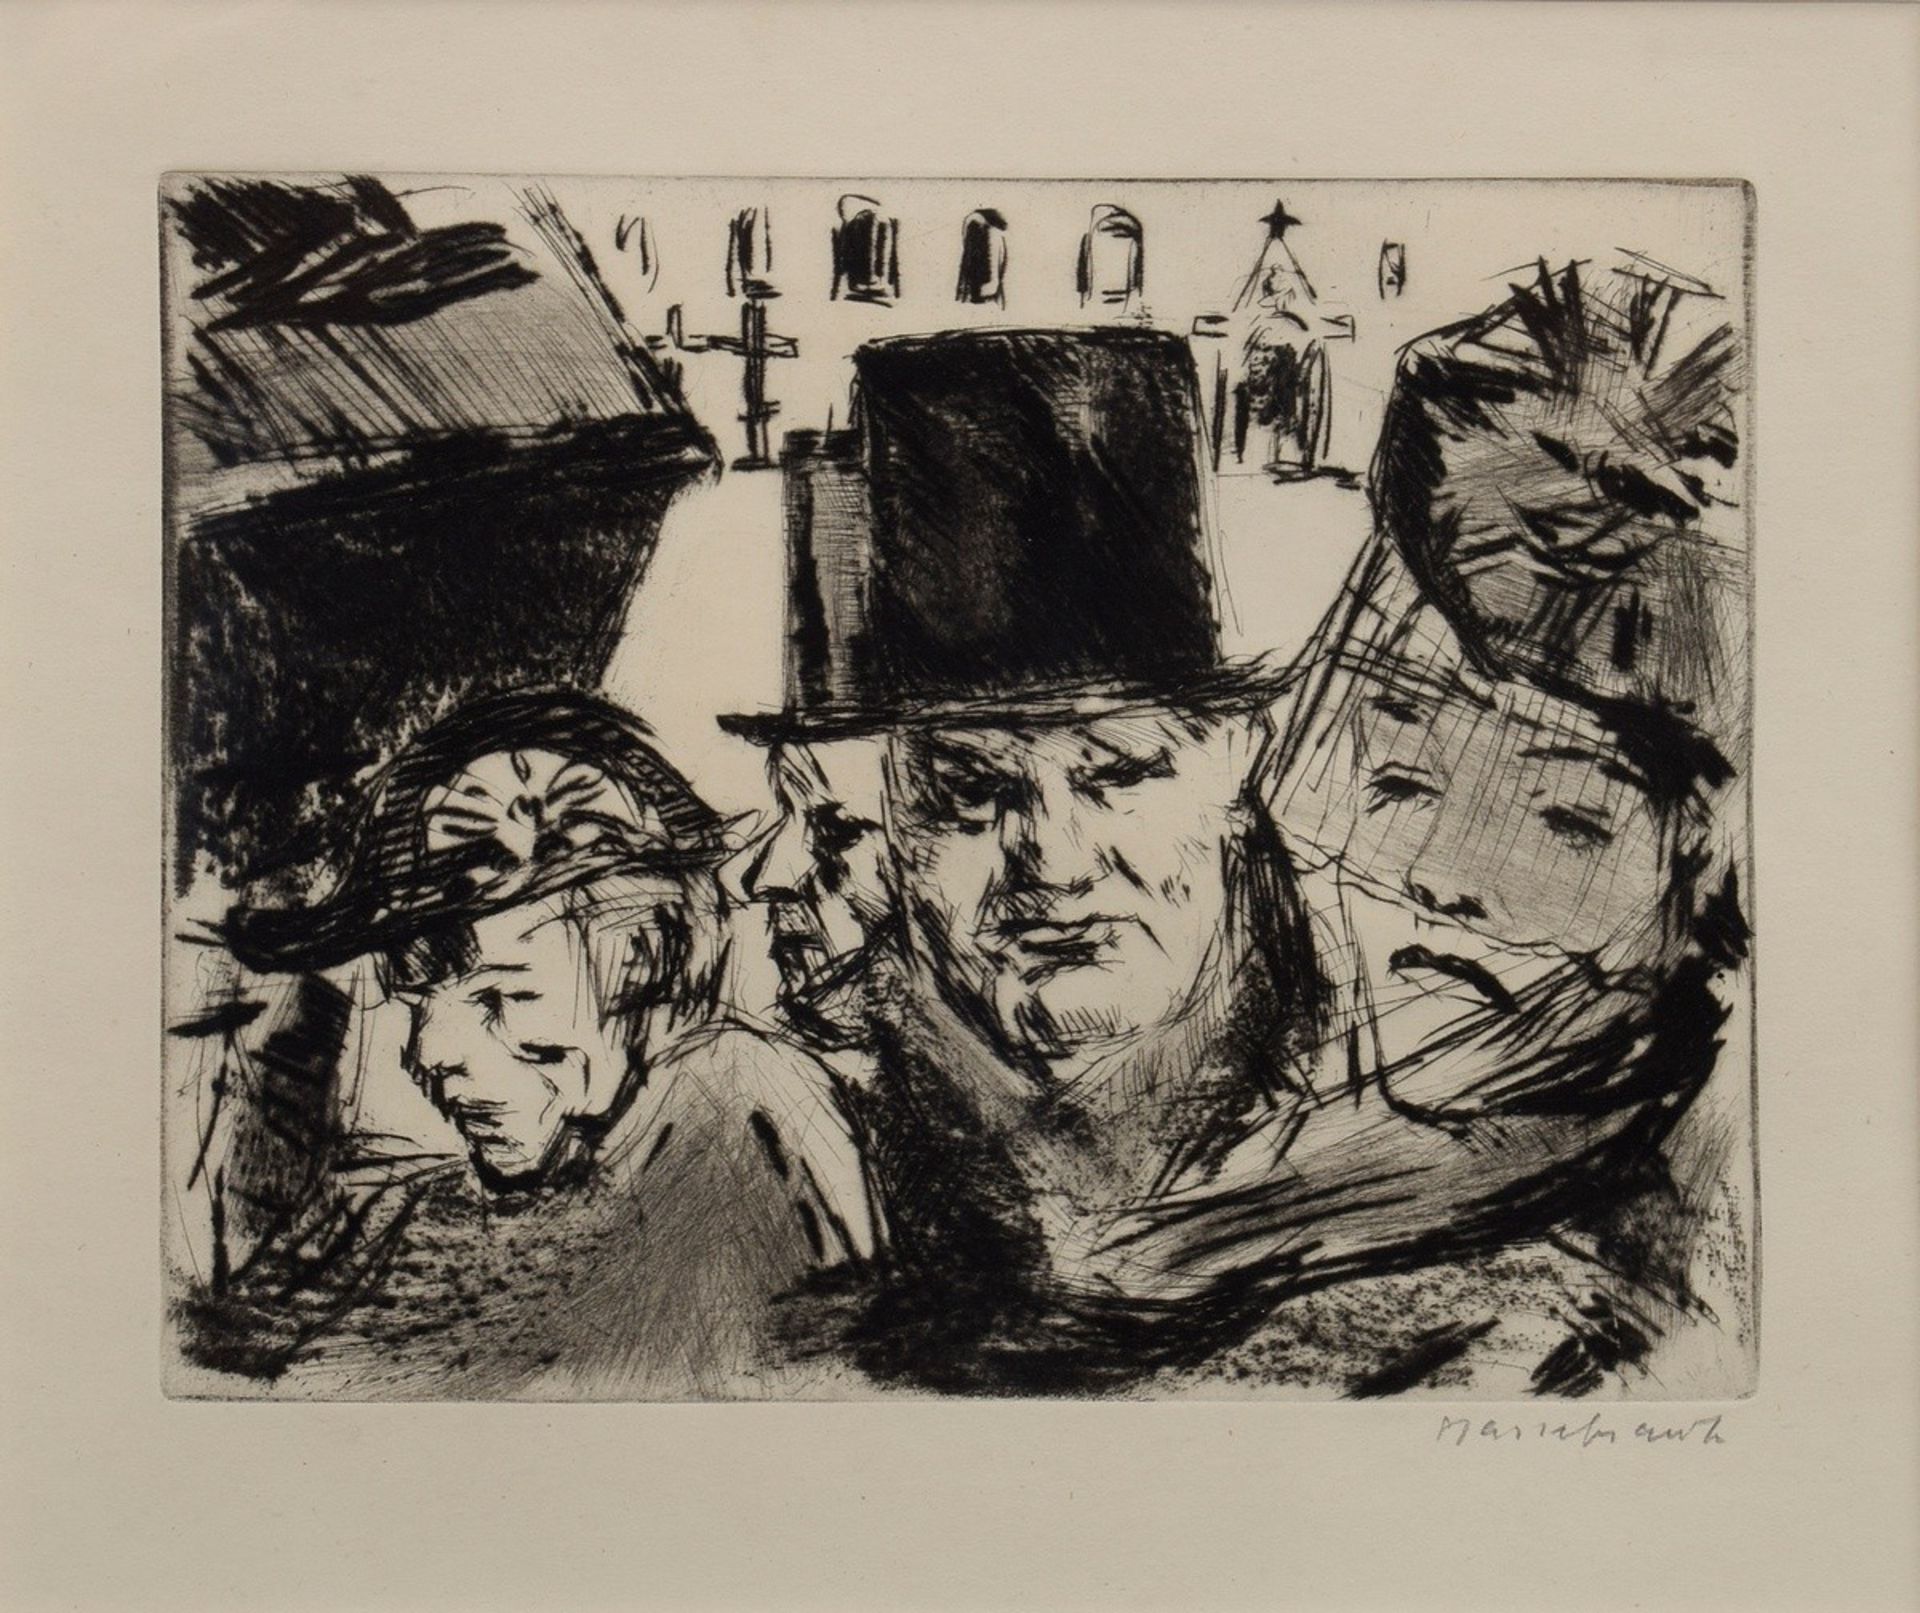 Hassebrauck, Ernst (1905-1974) "Funeral" 1947, etching, signed lower right, Berlin frame (small def